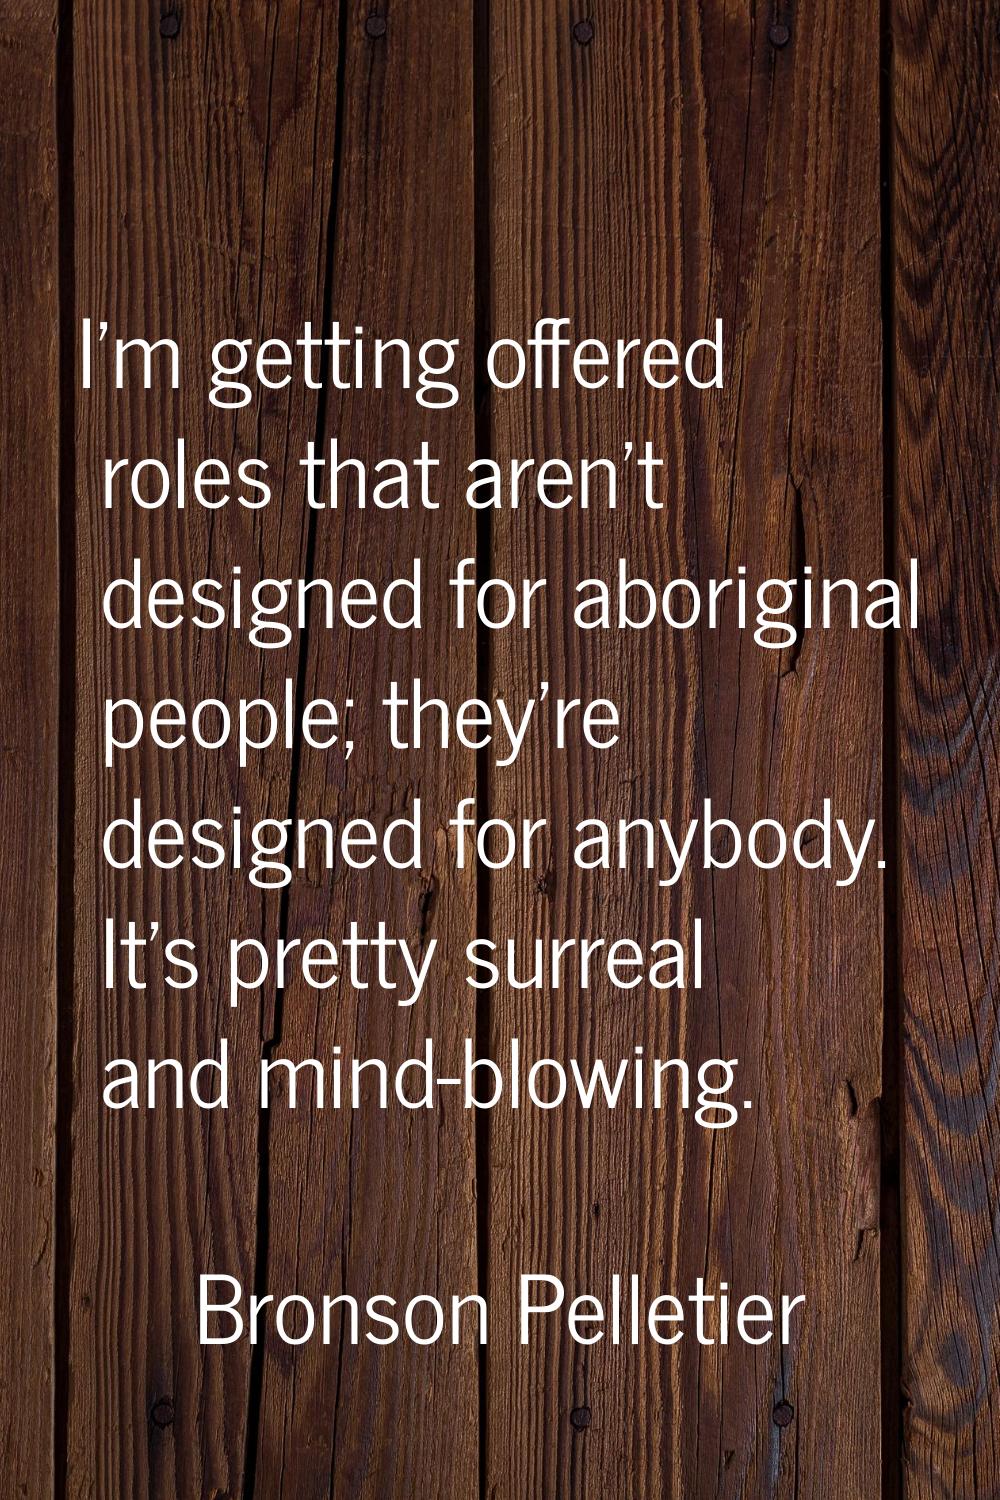 I'm getting offered roles that aren't designed for aboriginal people; they're designed for anybody.